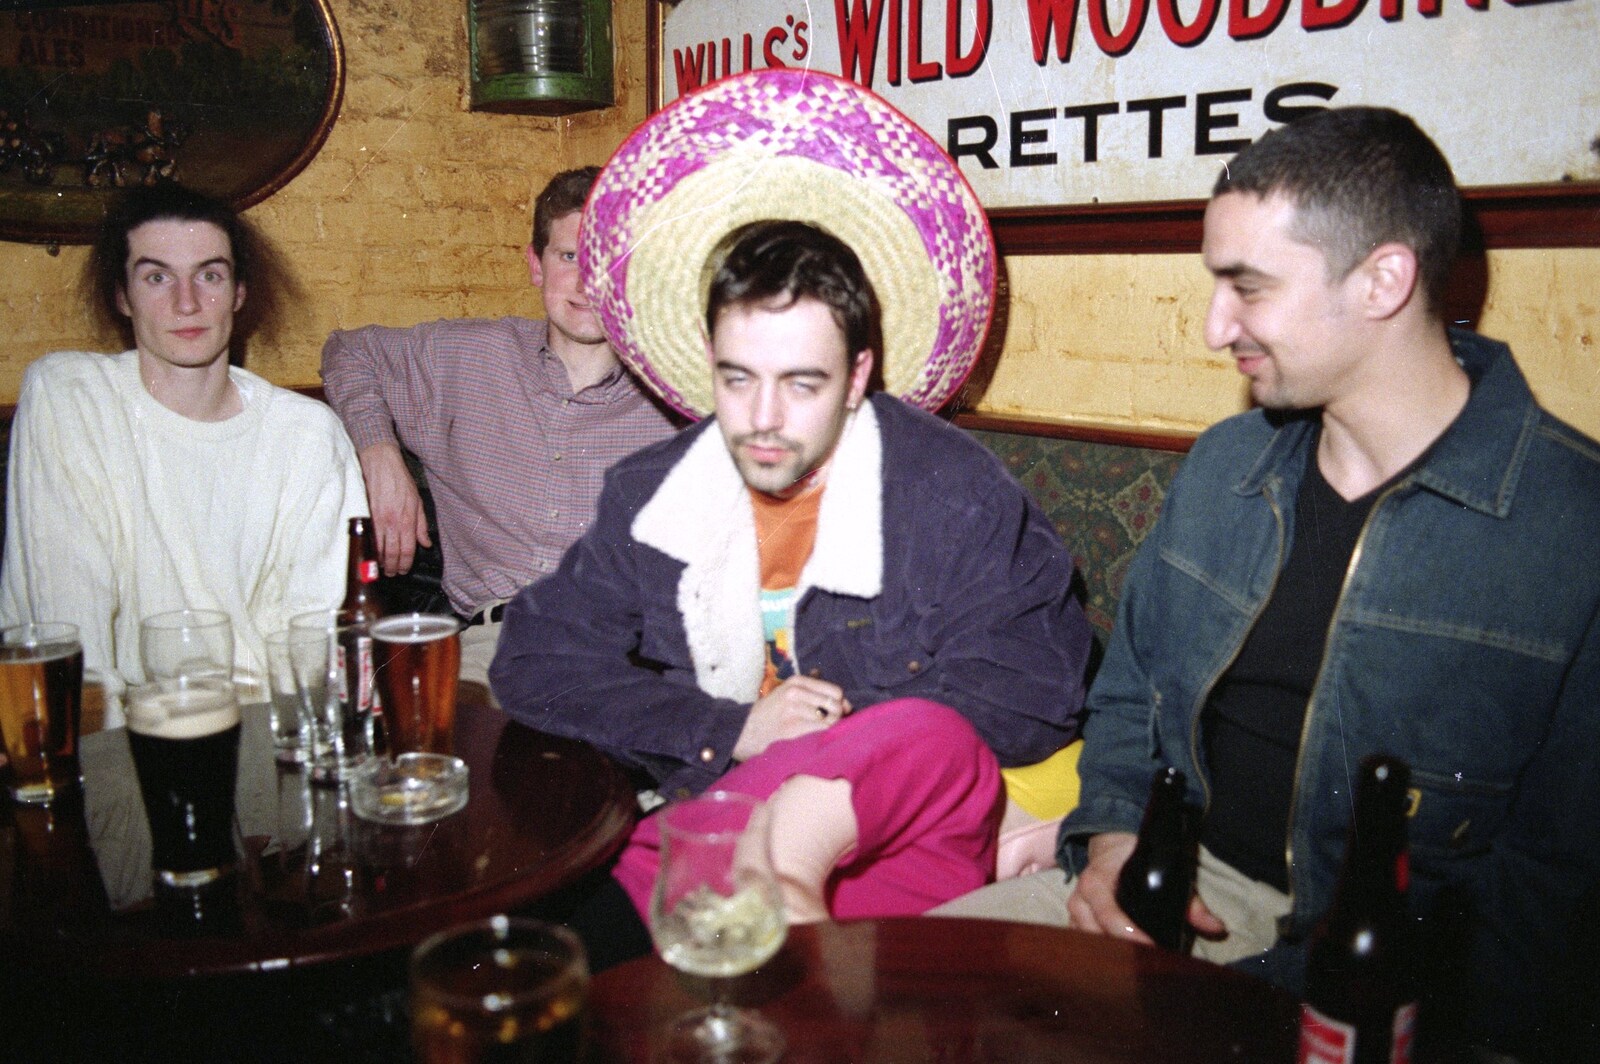 CISU, Los Mexicanos and the Inflatable Woman, Ipswich, Suffolk - 25th April 1996: Trev looks mashed